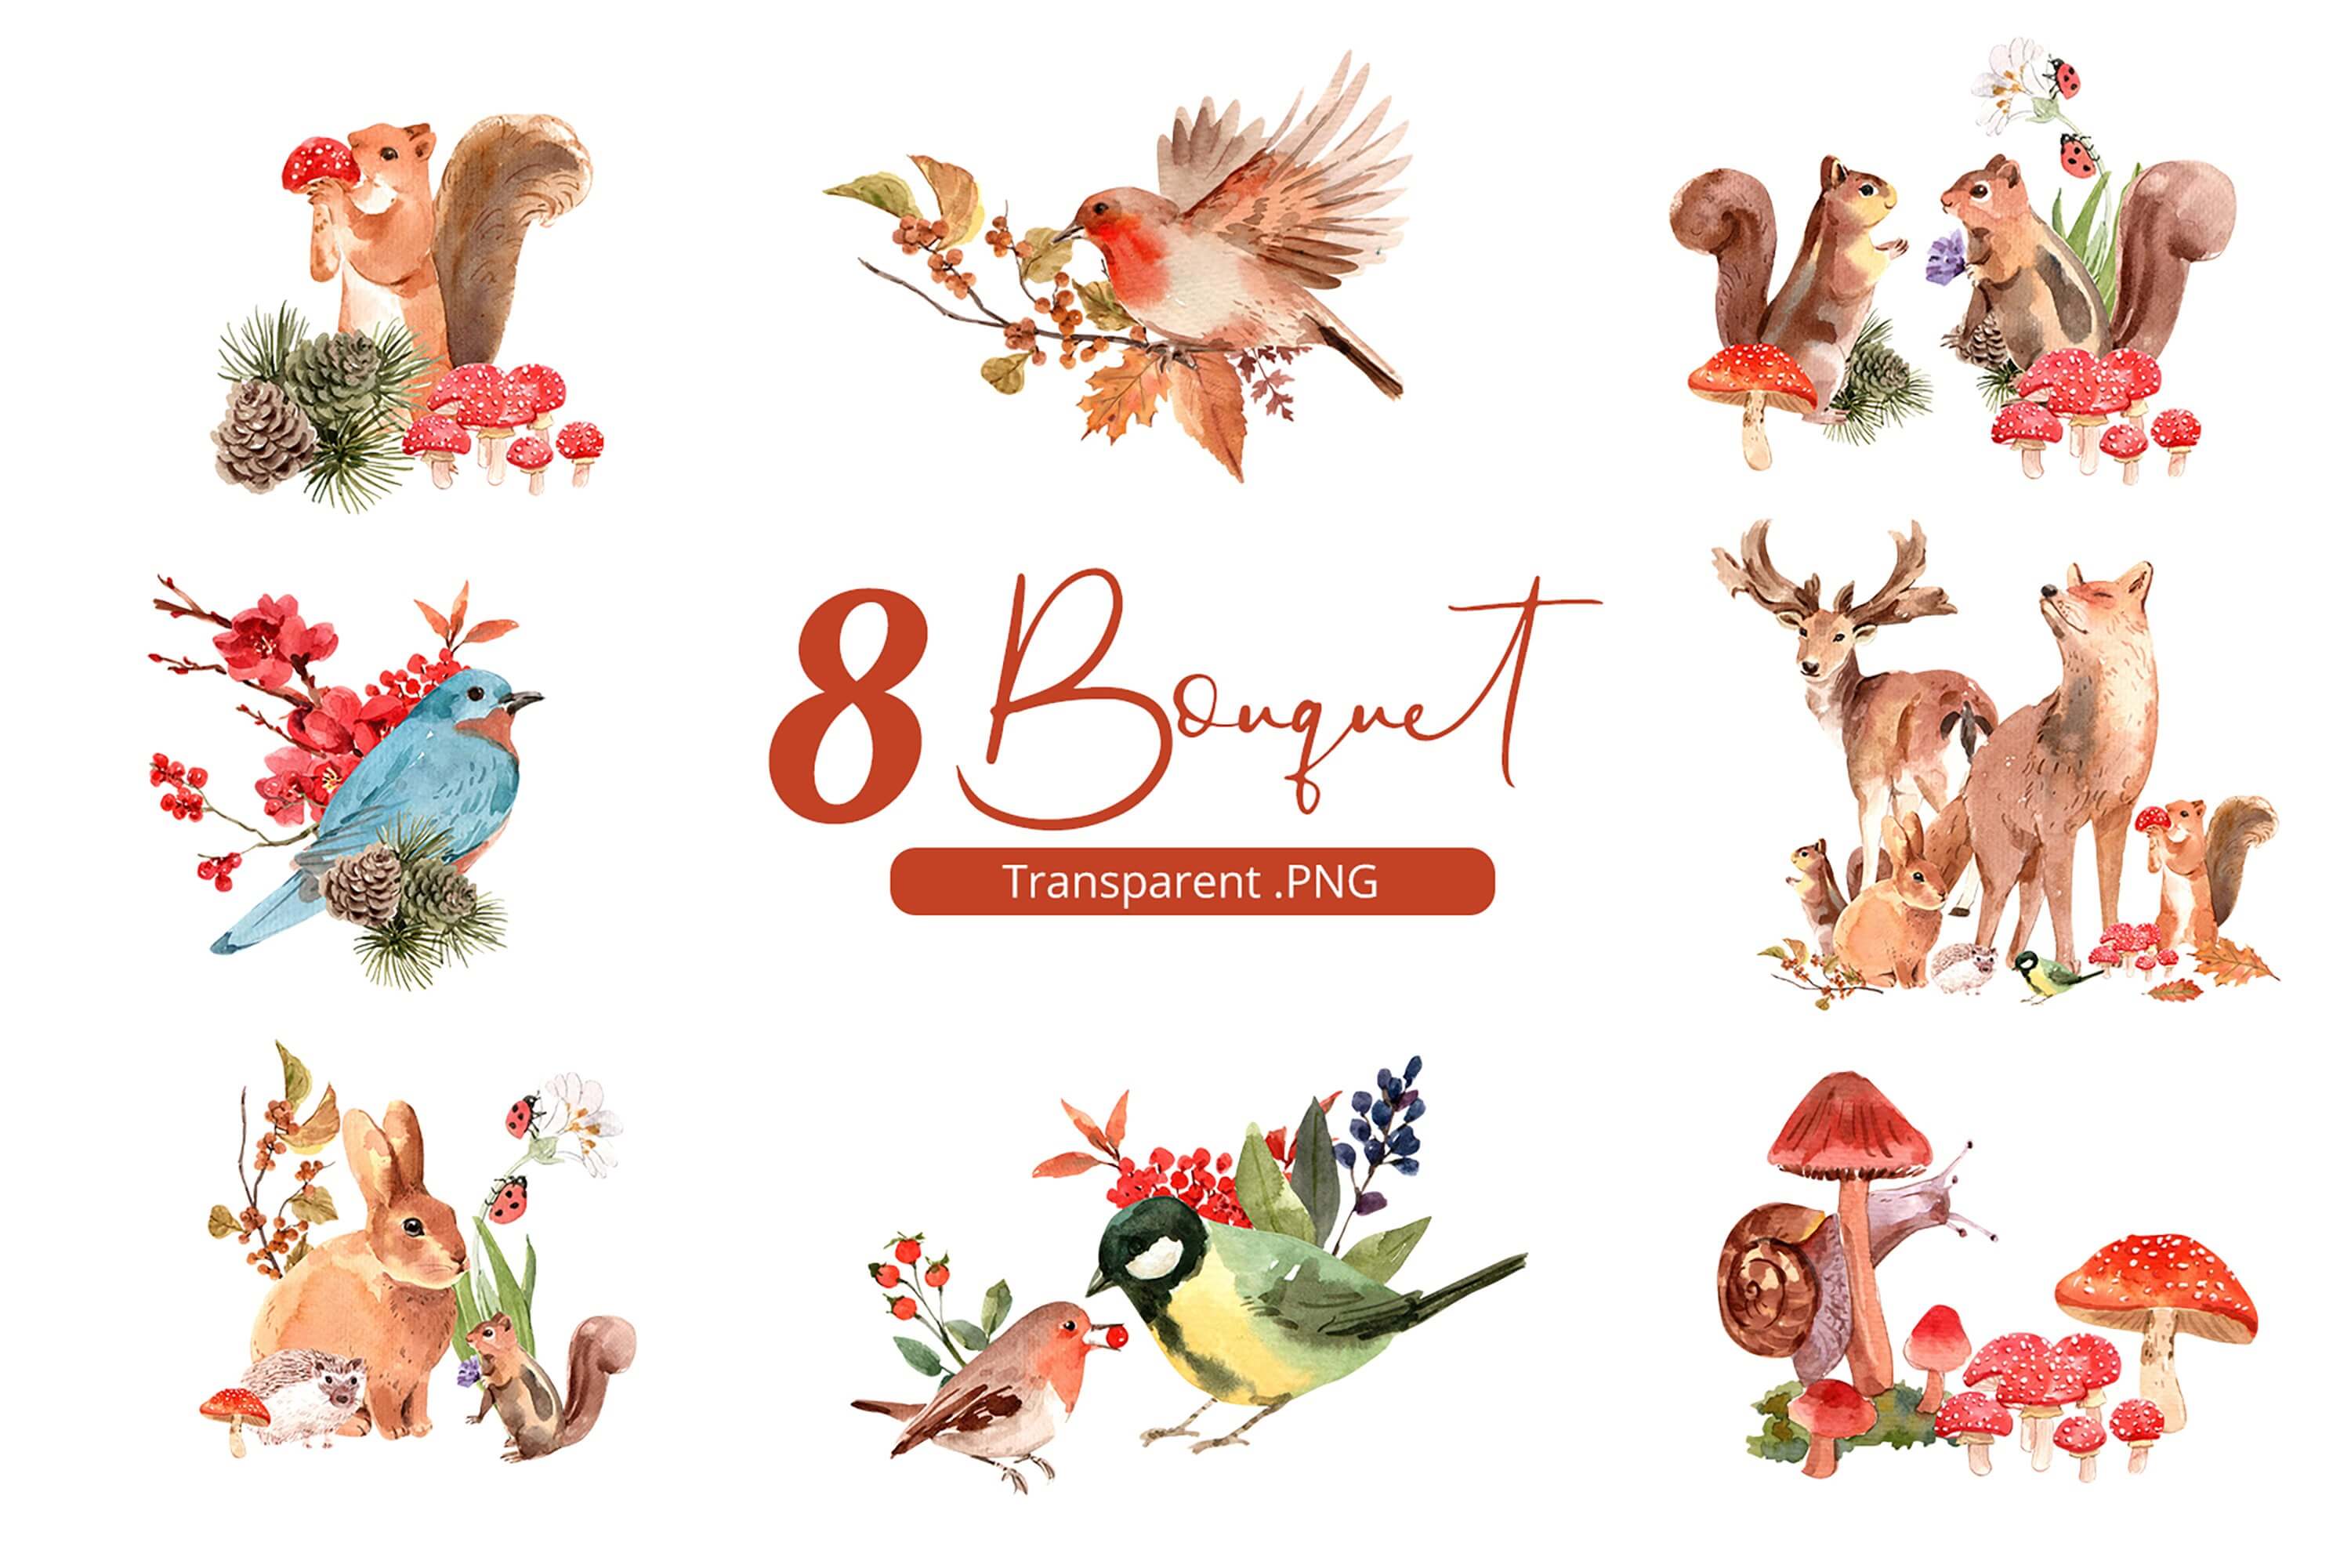 8 bouquets are made up of wildlife, birds, animals and forest harvest.